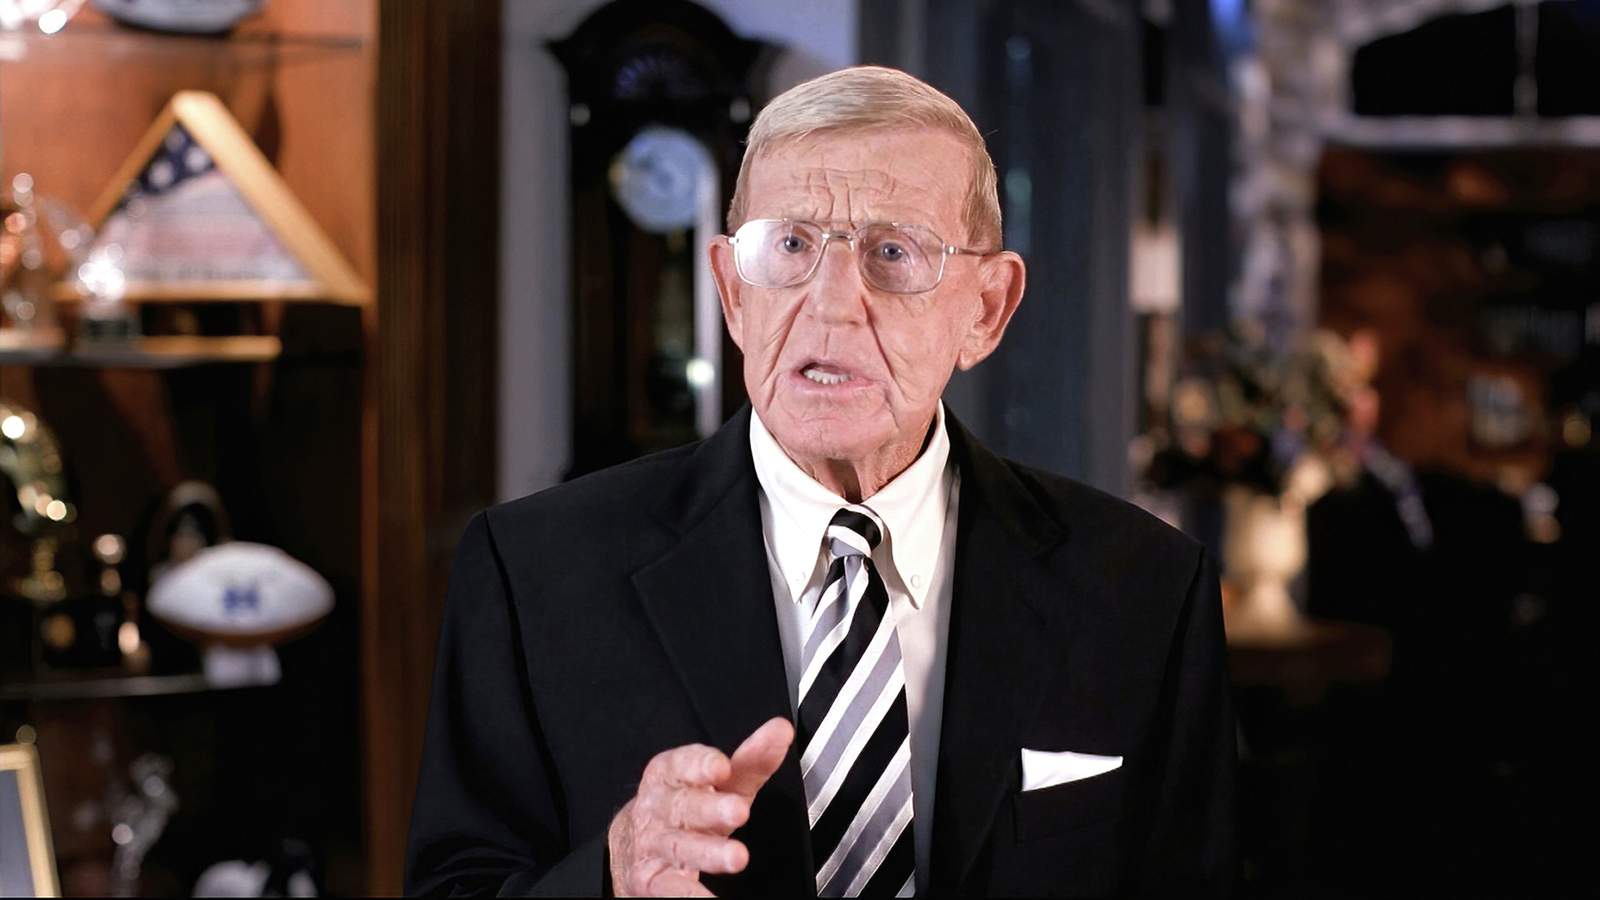 Longtime football coach Lou Holtz to get Medal of Freedom